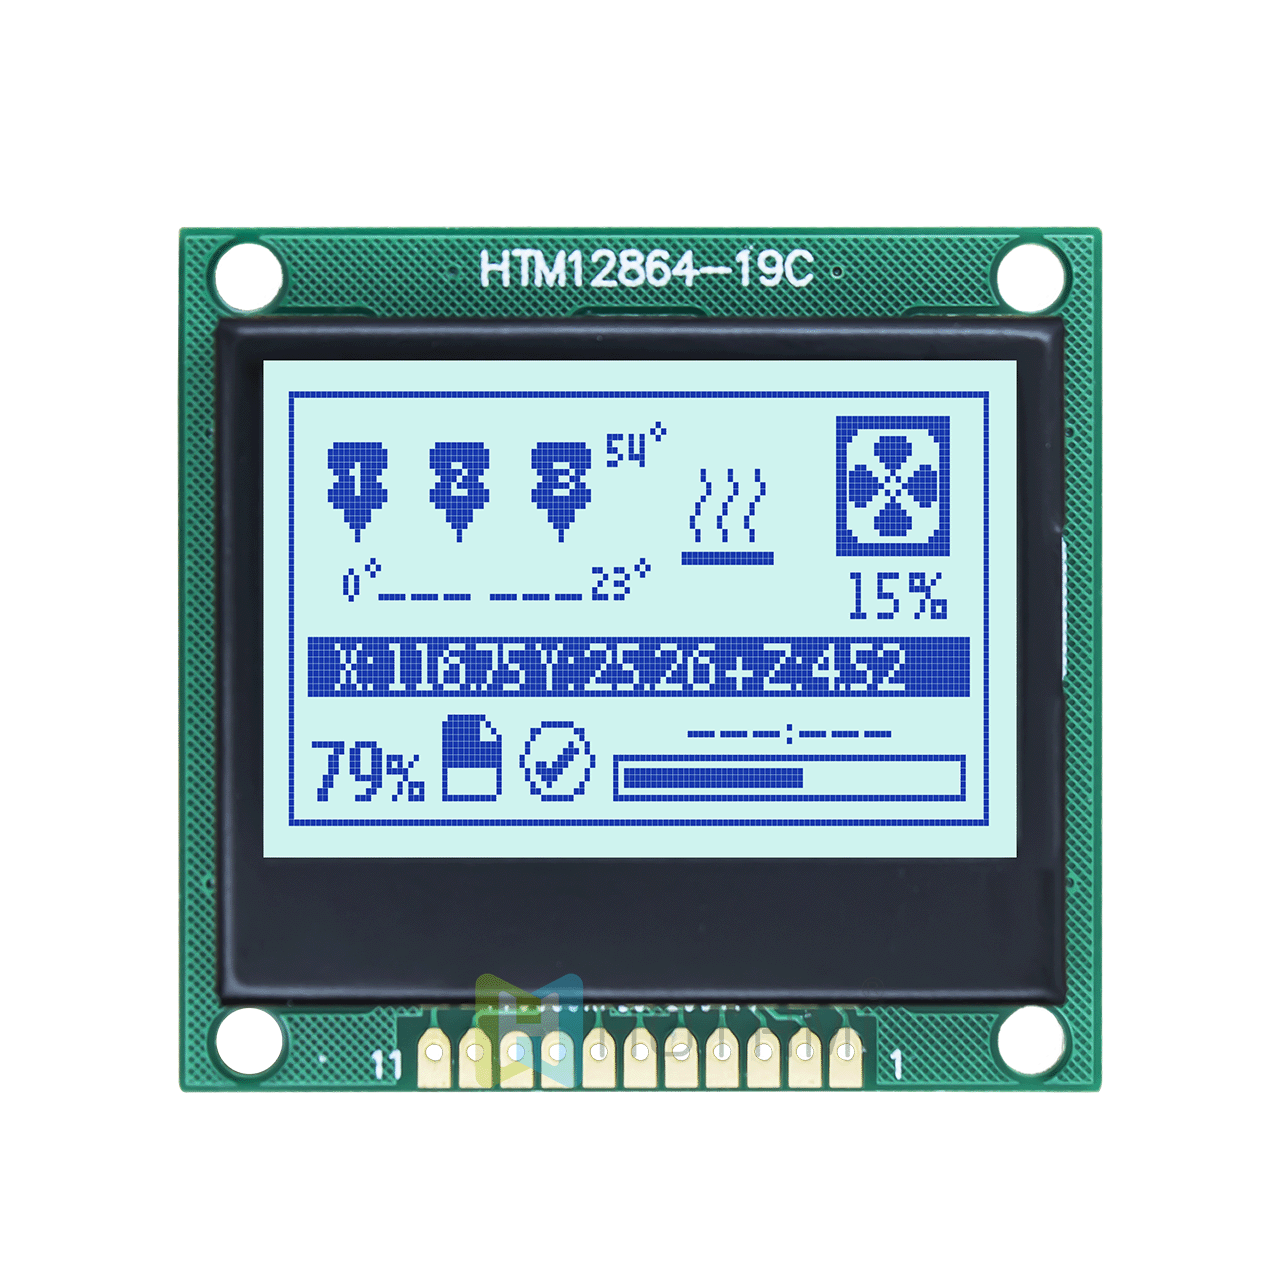 1.7 inch 128 x 64 LCD graphic display | 12864 LCD graphic display module | SPI interface | STN positive gray background blue character display | translucent polarizer